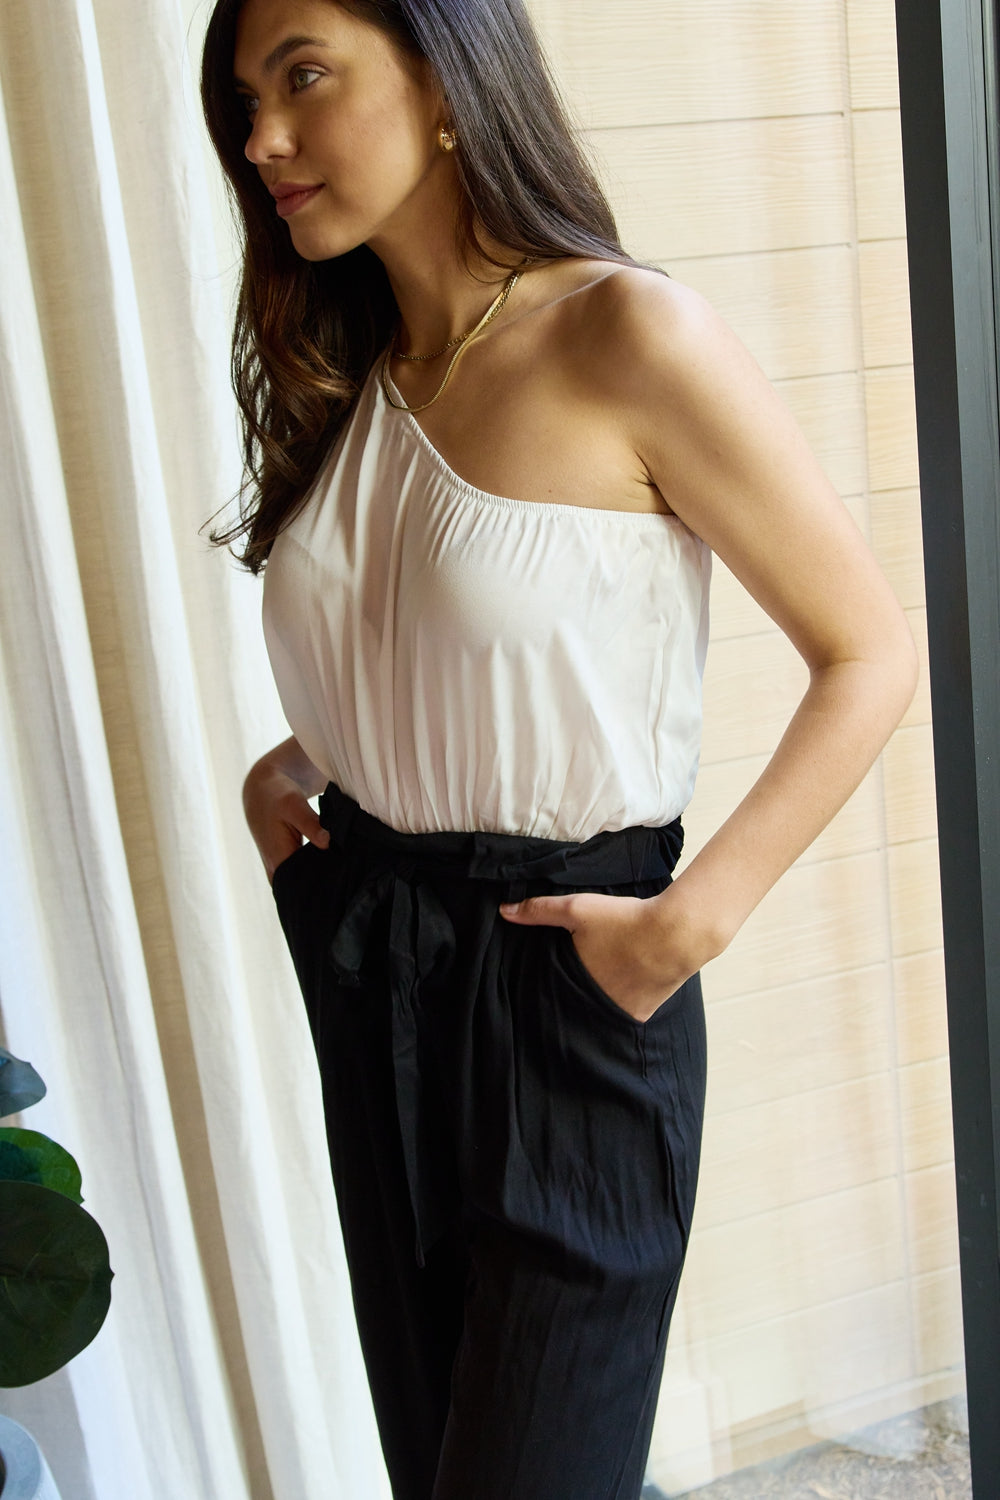 Dress Day Marvelous in Manhattan One-Shoulder Jumpsuit in White/Black - Online Only